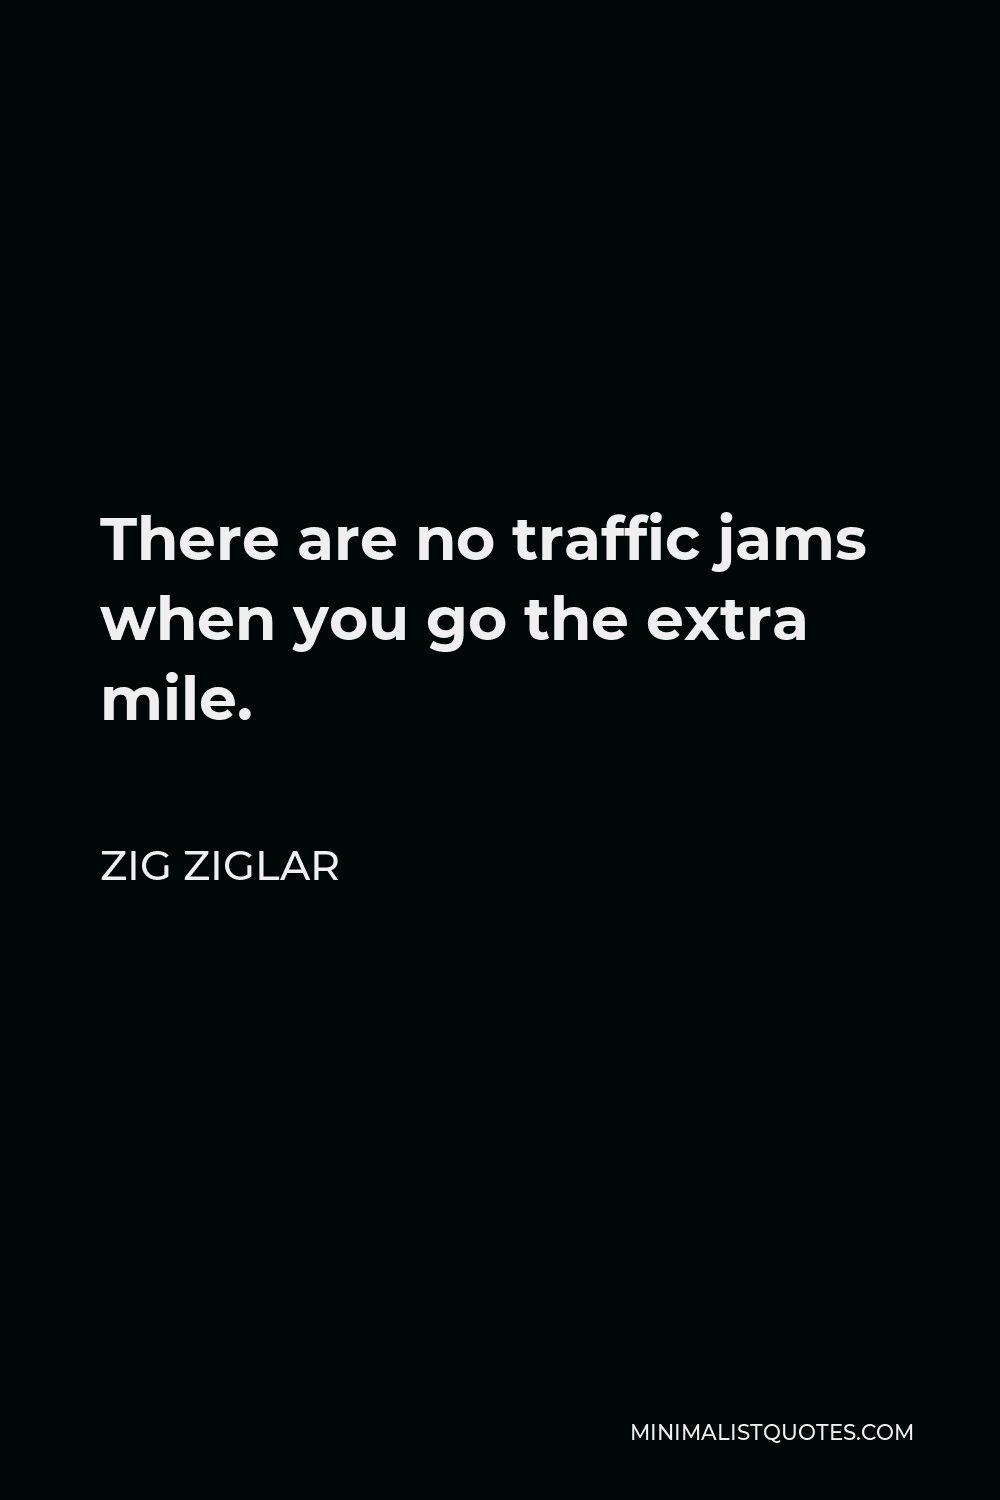 Zig Ziglar Quote - There are no traffic jams when you go the extra mile.